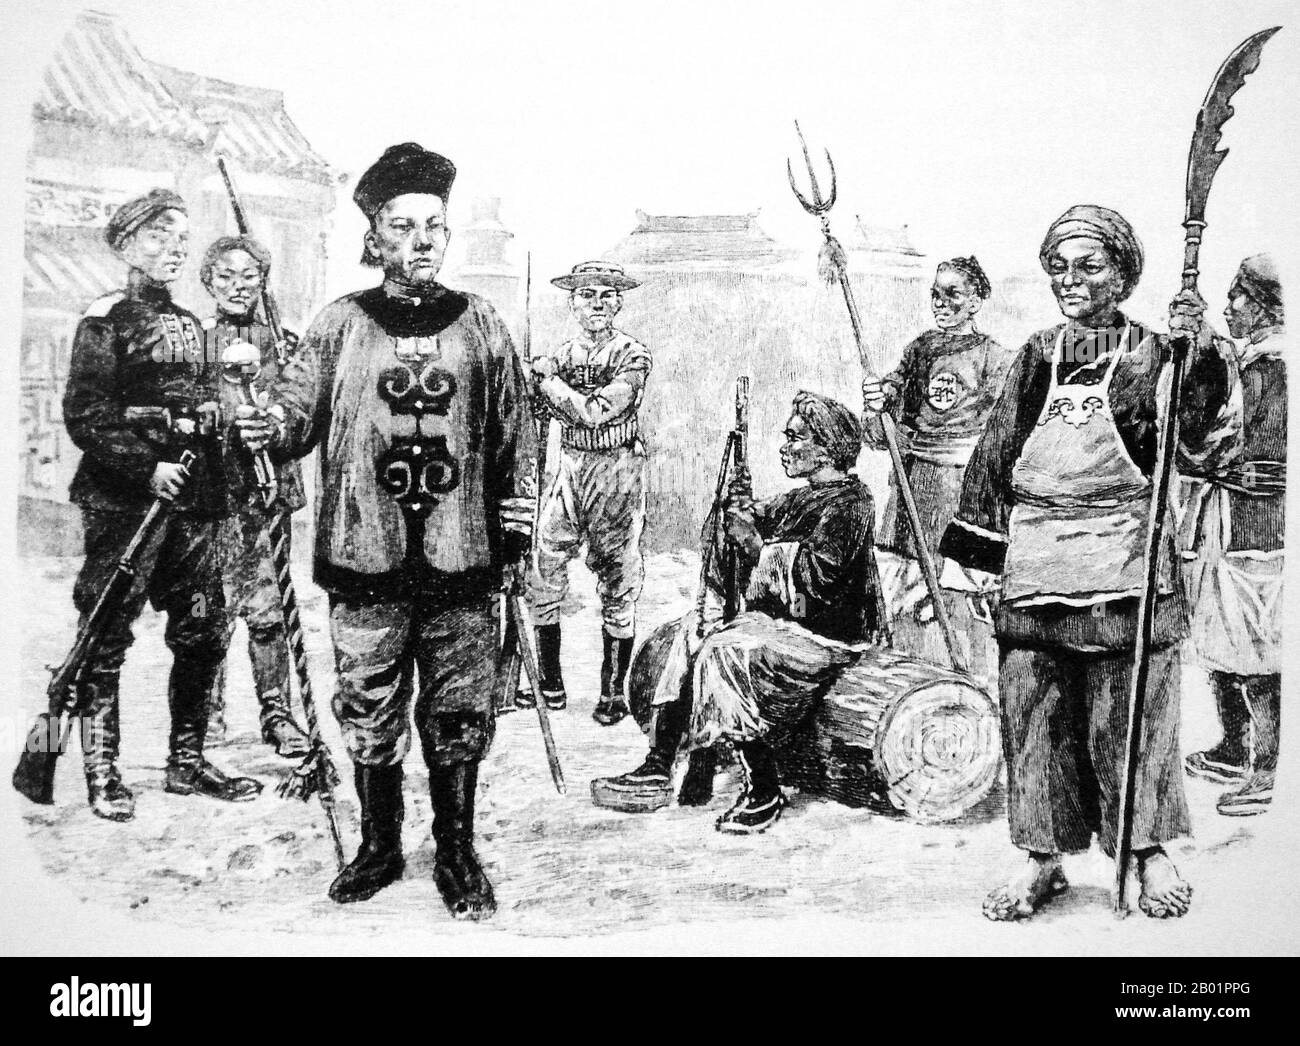 China/Germany: Boxer soldiers at Beijing, 1899-1901. Illustration from the Leipzig Illustrated Newspaper, 1900.  The Boxer Rebellion, also known as Boxer Uprising or Yihetuan Movement, was a proto-nationalist movement by the Righteous Harmony Society in China between 1898 and 1901, opposing foreign imperialism and Christianity.  The uprising took place in response to foreign spheres of influence in China, with grievances ranging from opium traders, political invasion, economic manipulation, to missionary evangelism. In China, popular sentiment remained resistant to foreign influences. Stock Photo